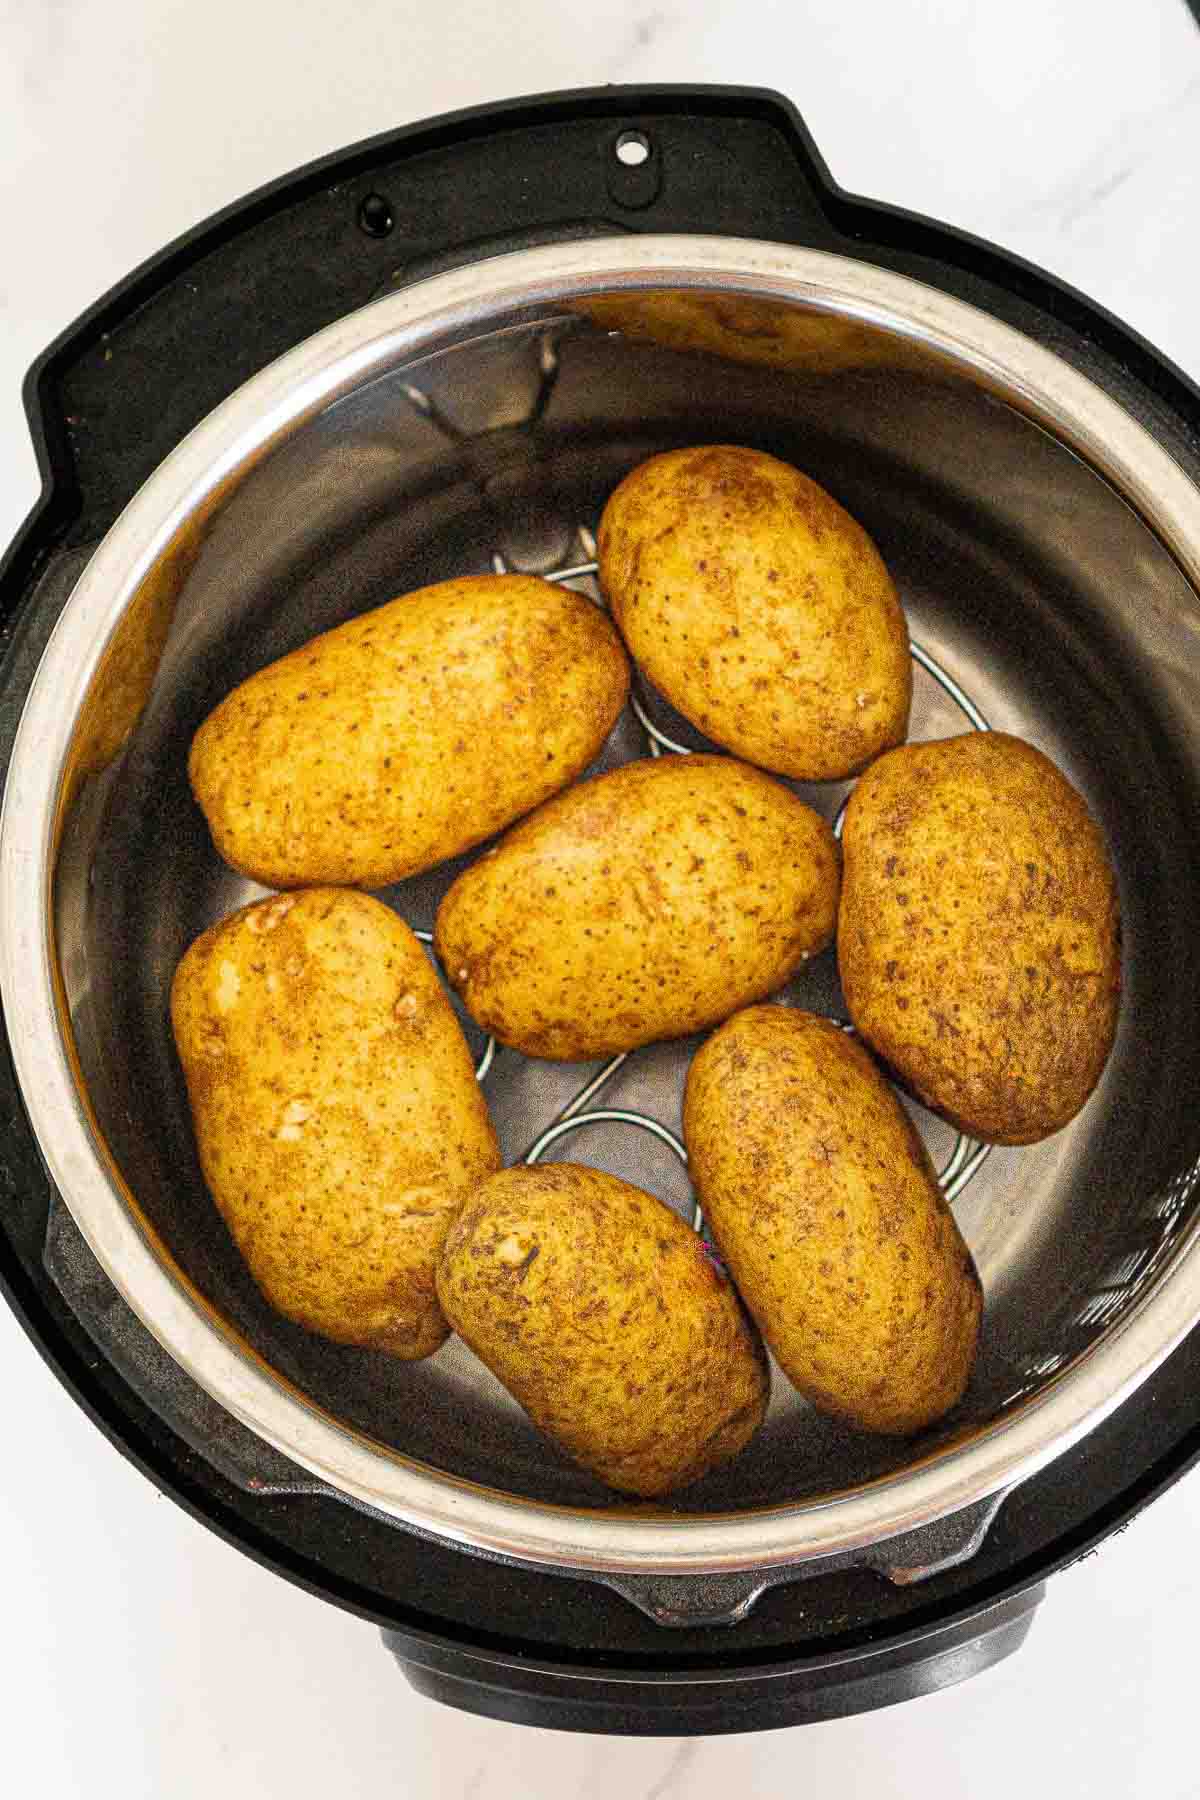 Cooking baked potatoes in an Instant Pot